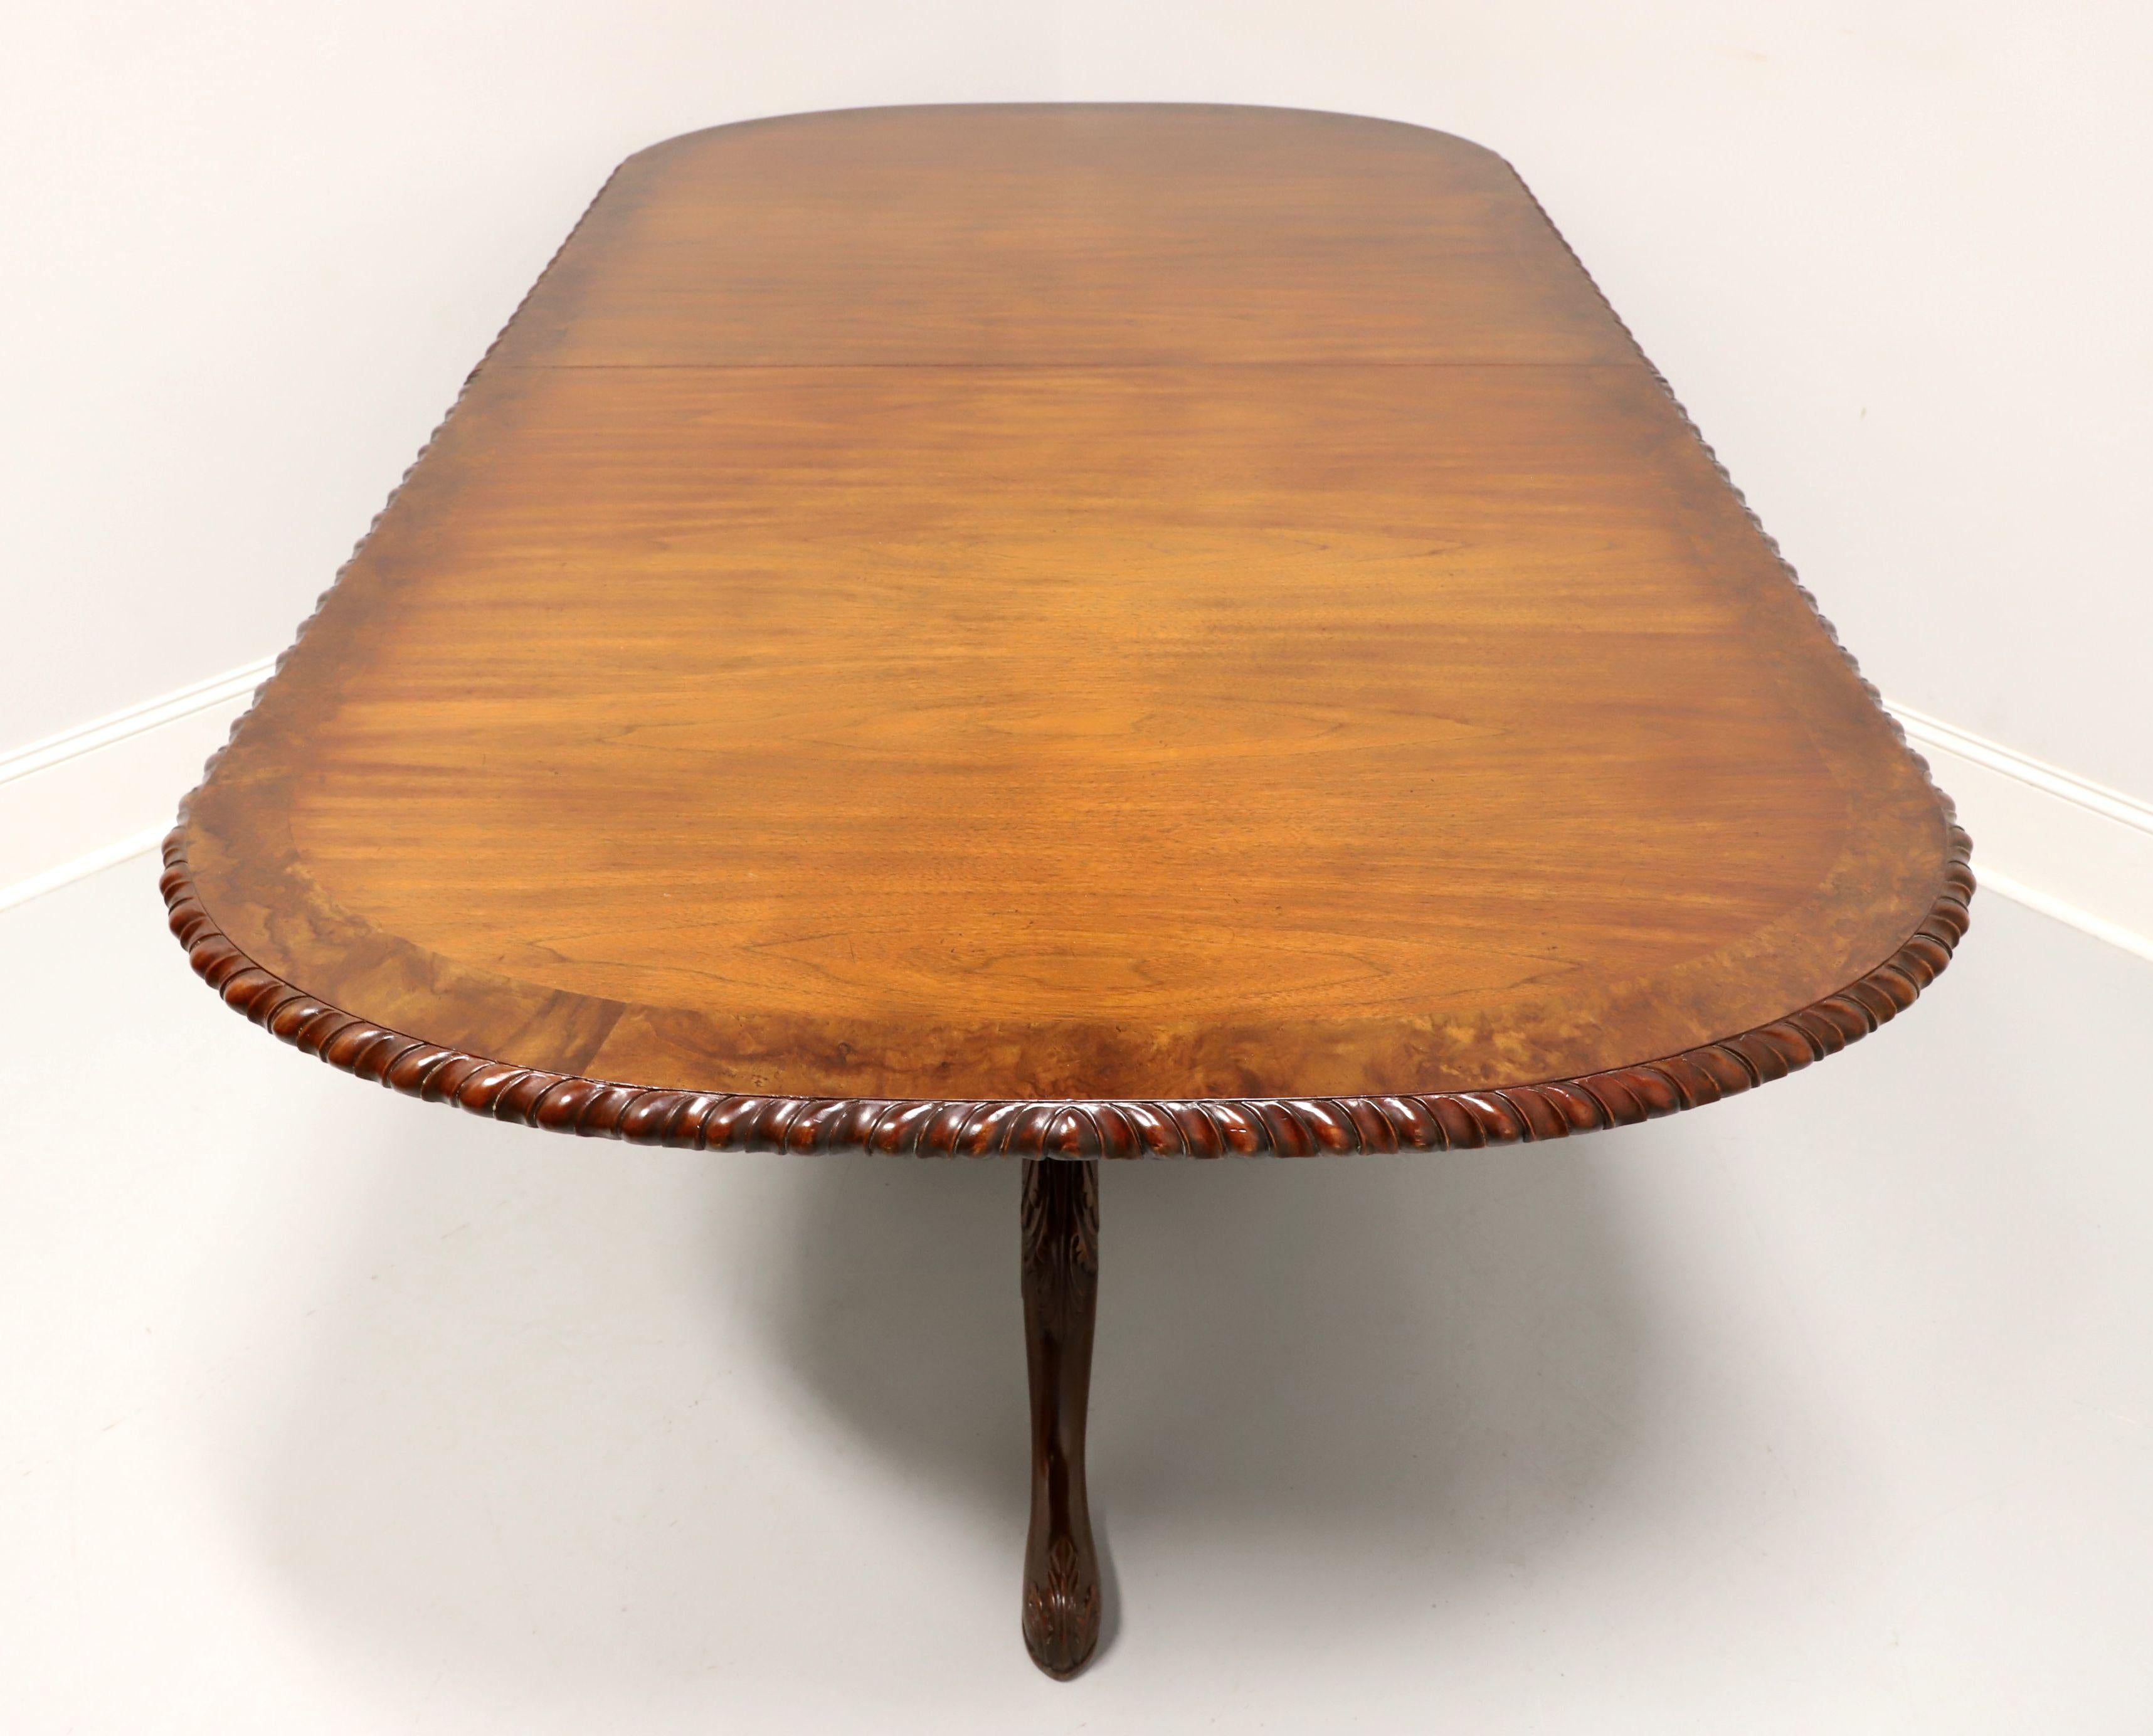 A rectangular double pedestal dining table in the Chippendale style by Maitland Smith. Walnut with burlwood banding to top, gadroon edge, rounded corners, dual decoratively carved pedestals with three legs and carved feet. Includes two extension